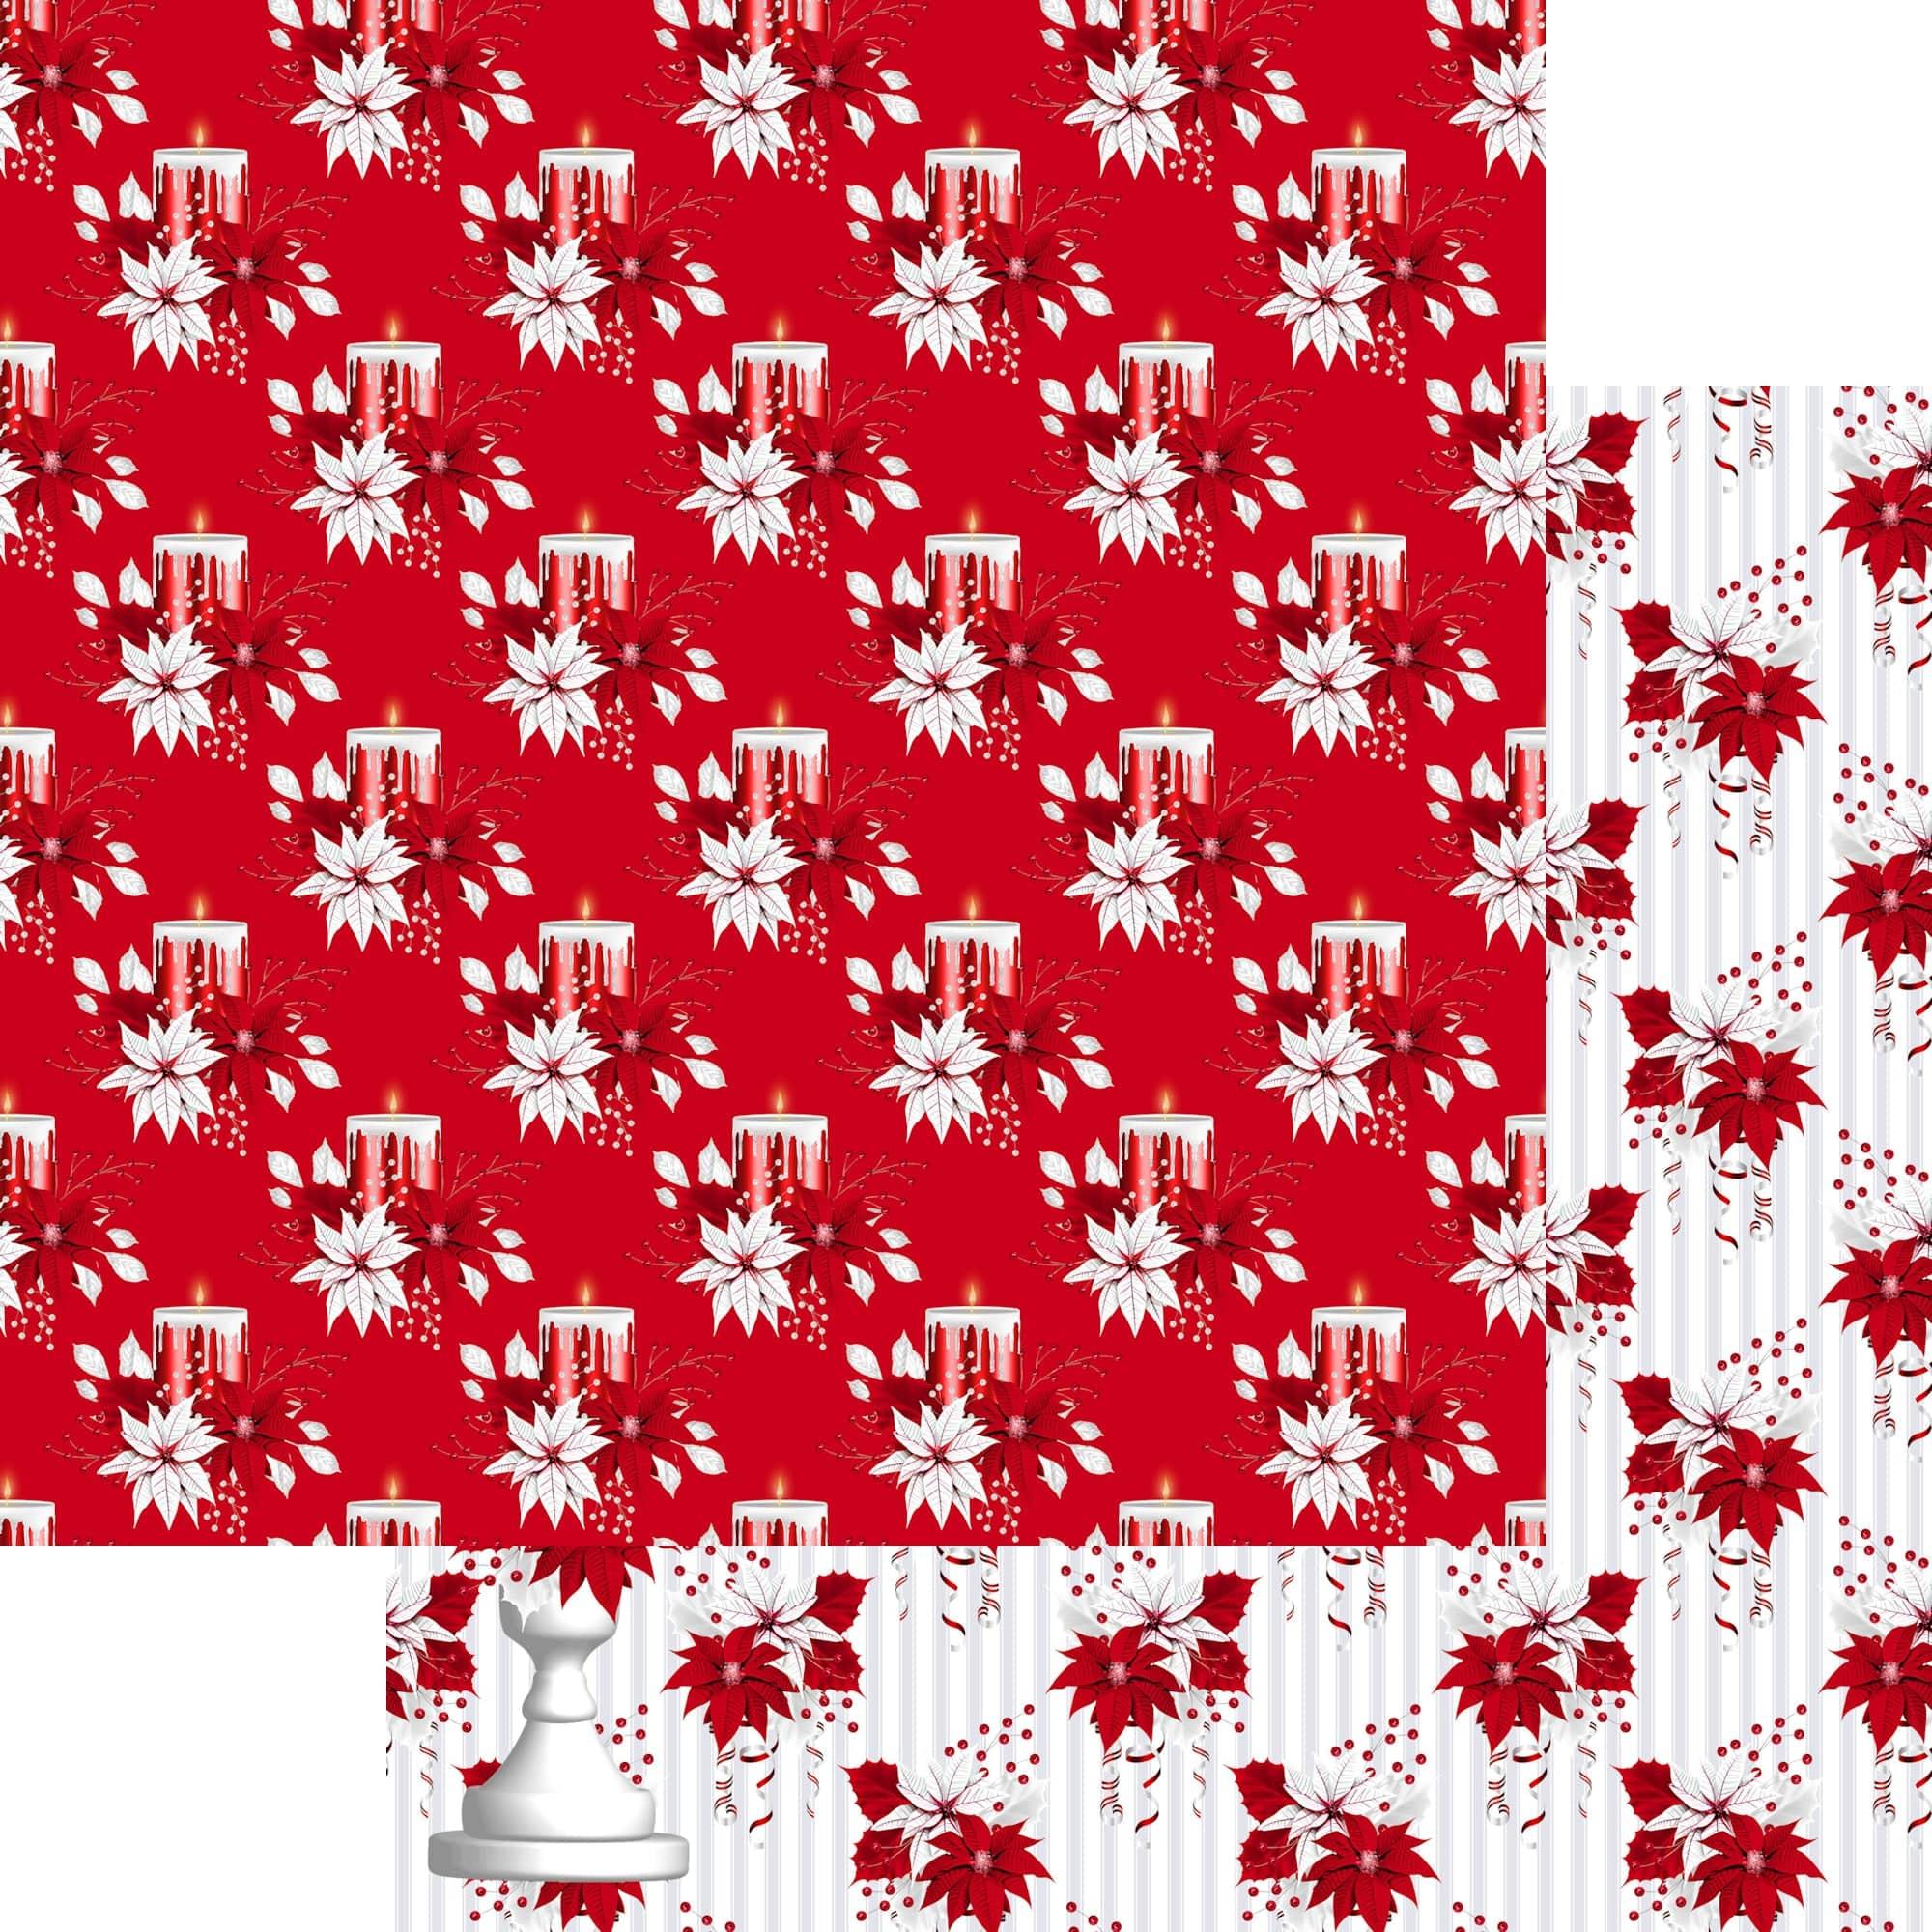 Peppermint Christmas Collection Flicker 12 x 12 Double-Sided Scrapbook Paper by SSC Designs - Scrapbook Supply Companies